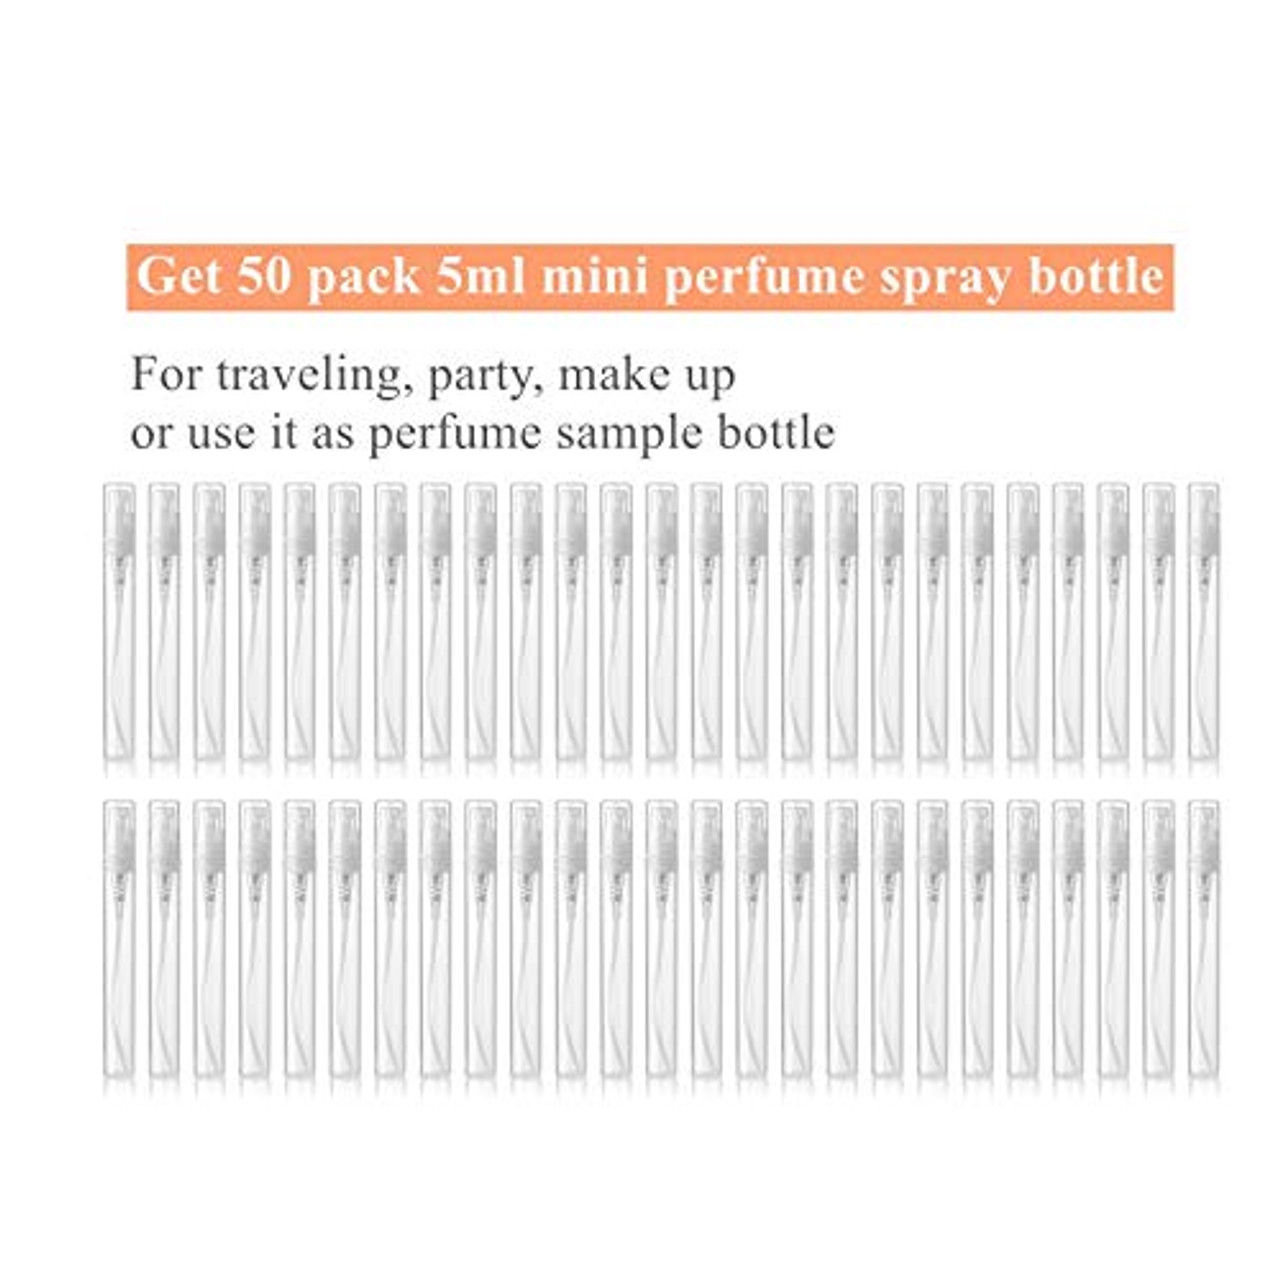 Plastic Atomizers Spray Bottle Alcohol Perfume Mister 5 ml • 3305 Beauty  Makeup Supply